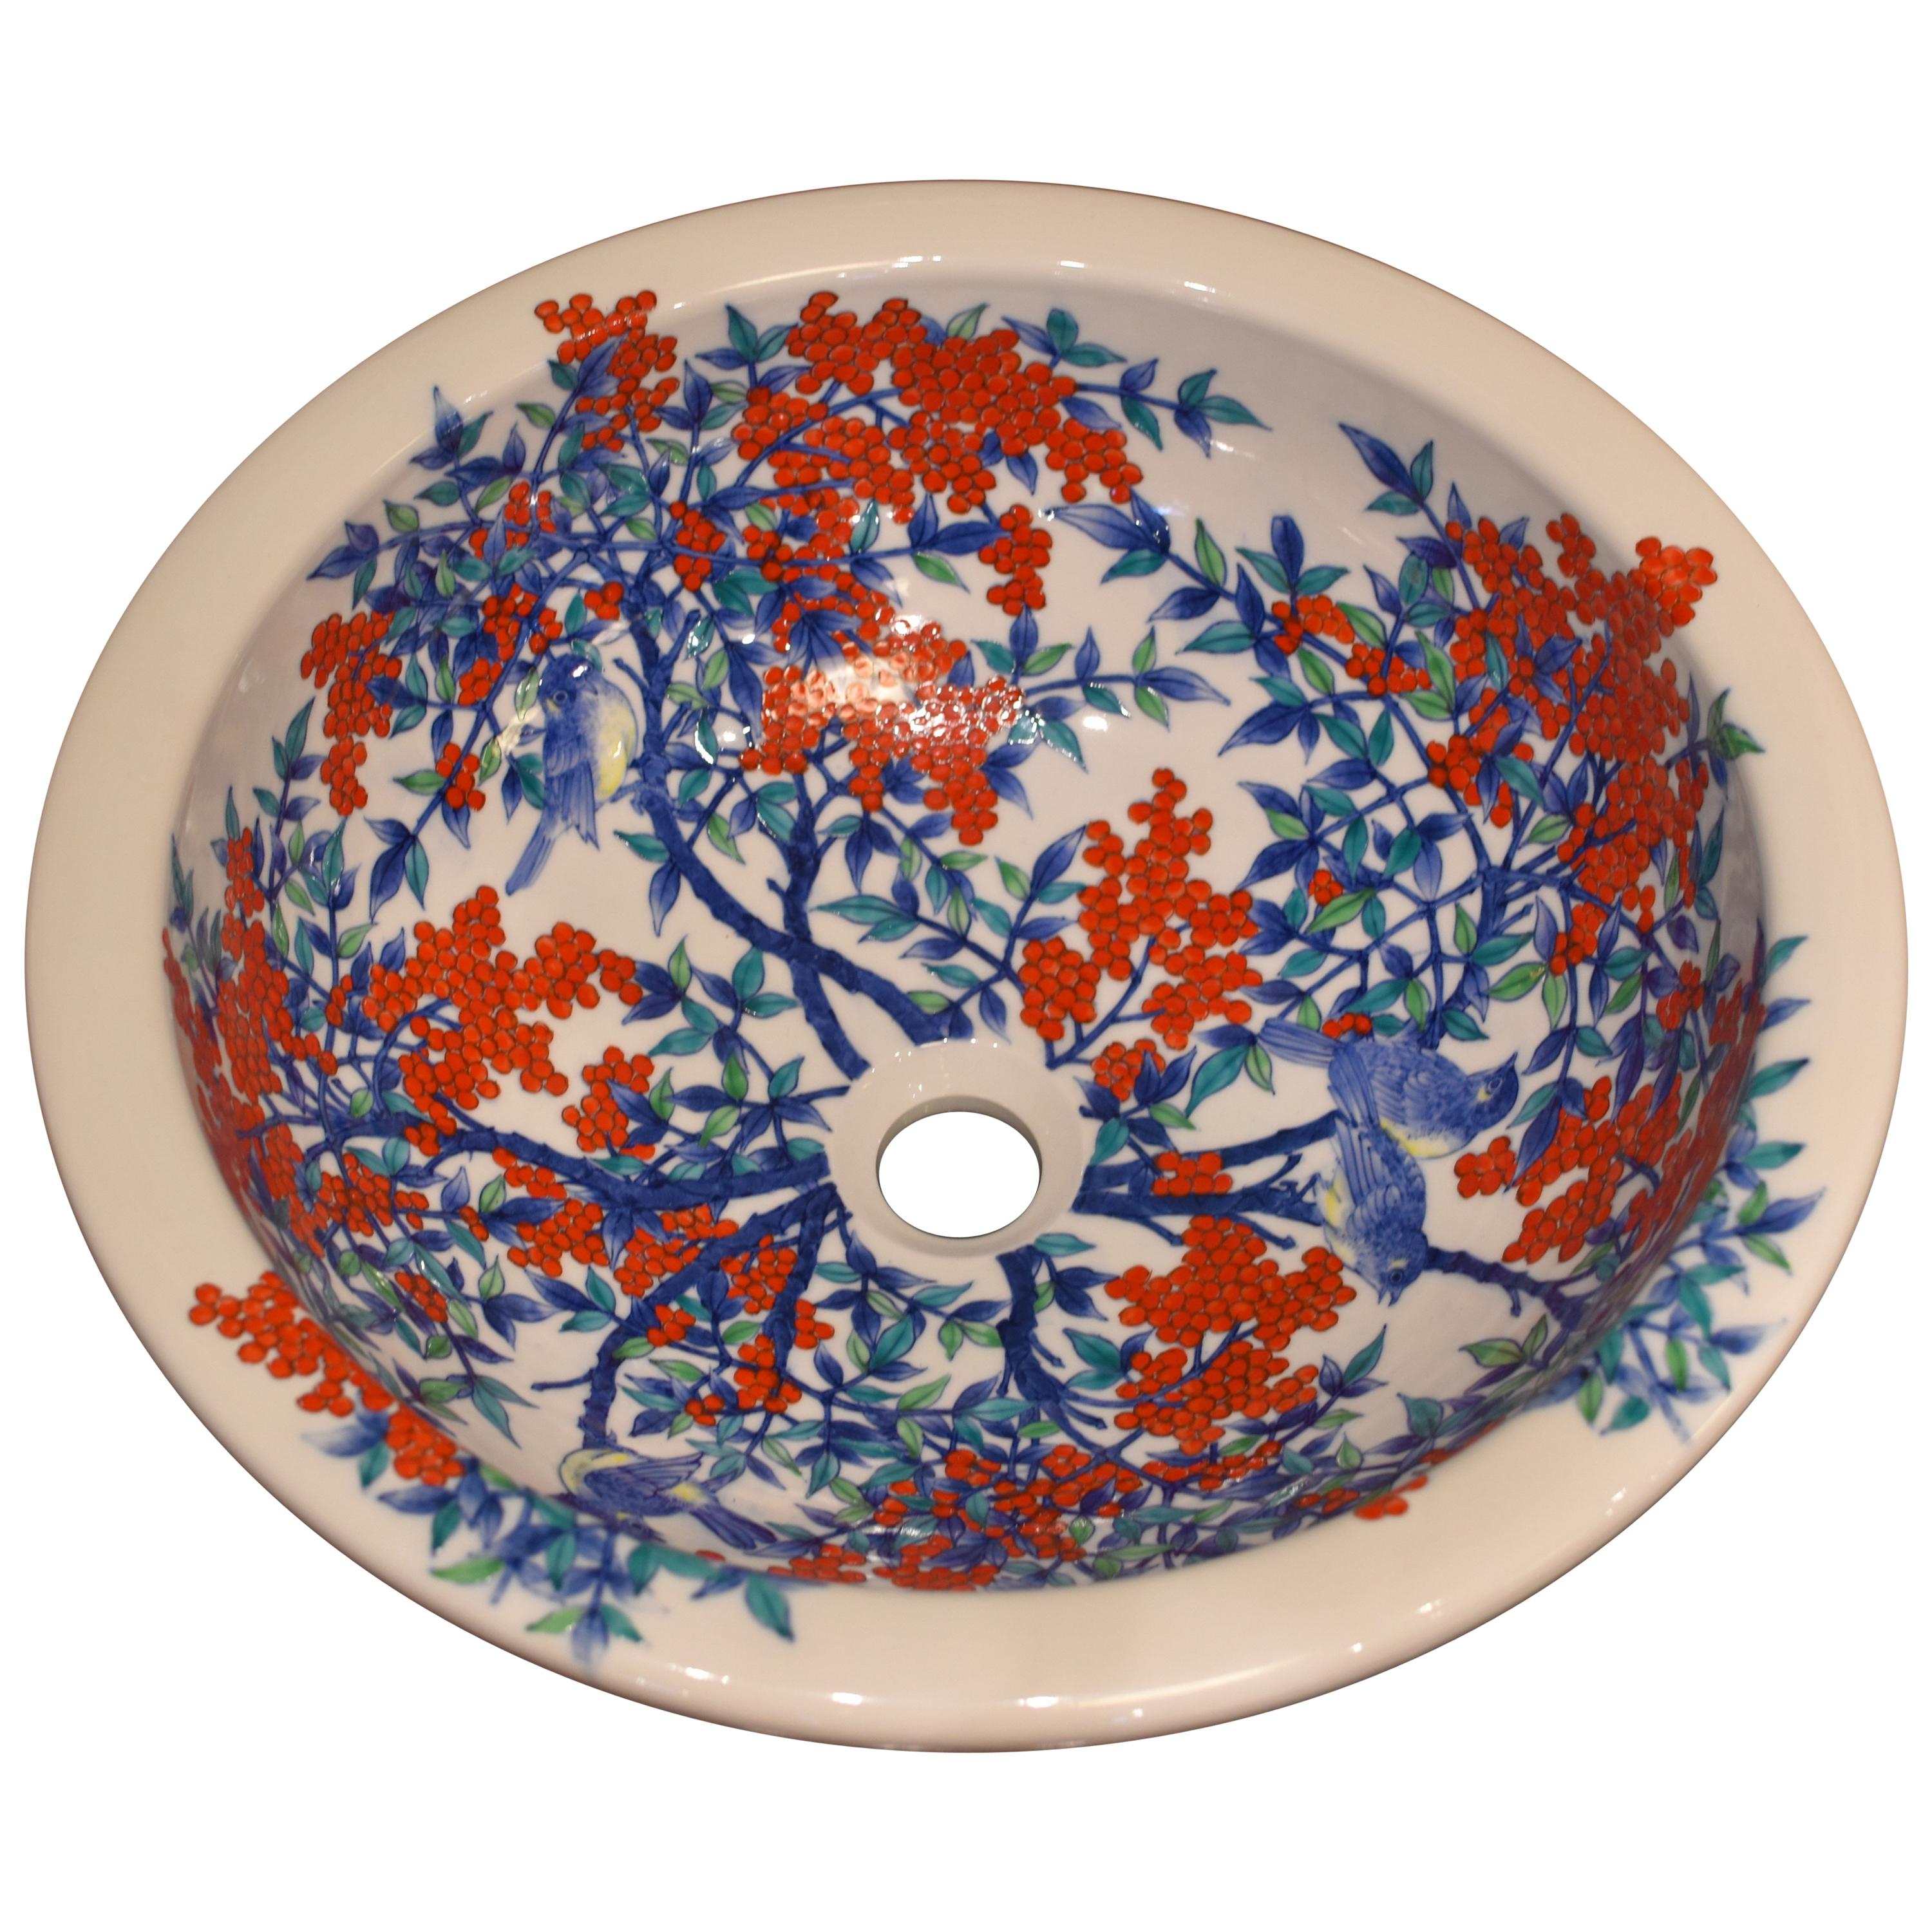 Contemporary Hand-Painted Porcelain Washbasin by Japanese Master Artist